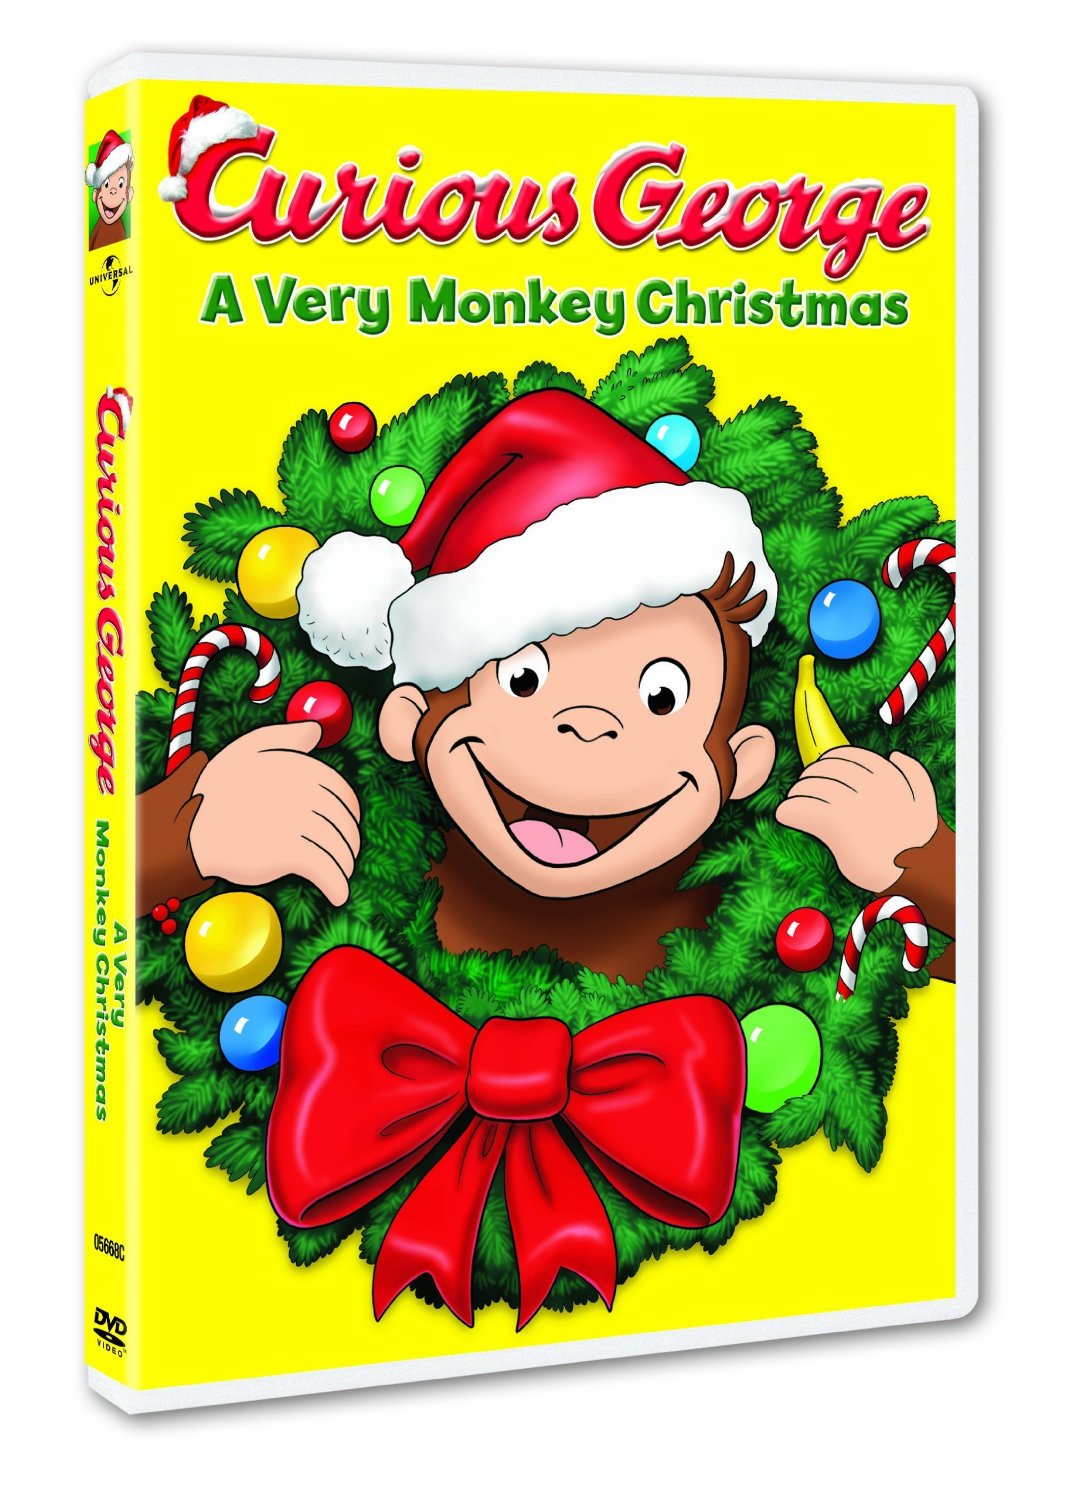 Curious George: A Very Monkey Christmas Only $4.99 – 67% Savings!!